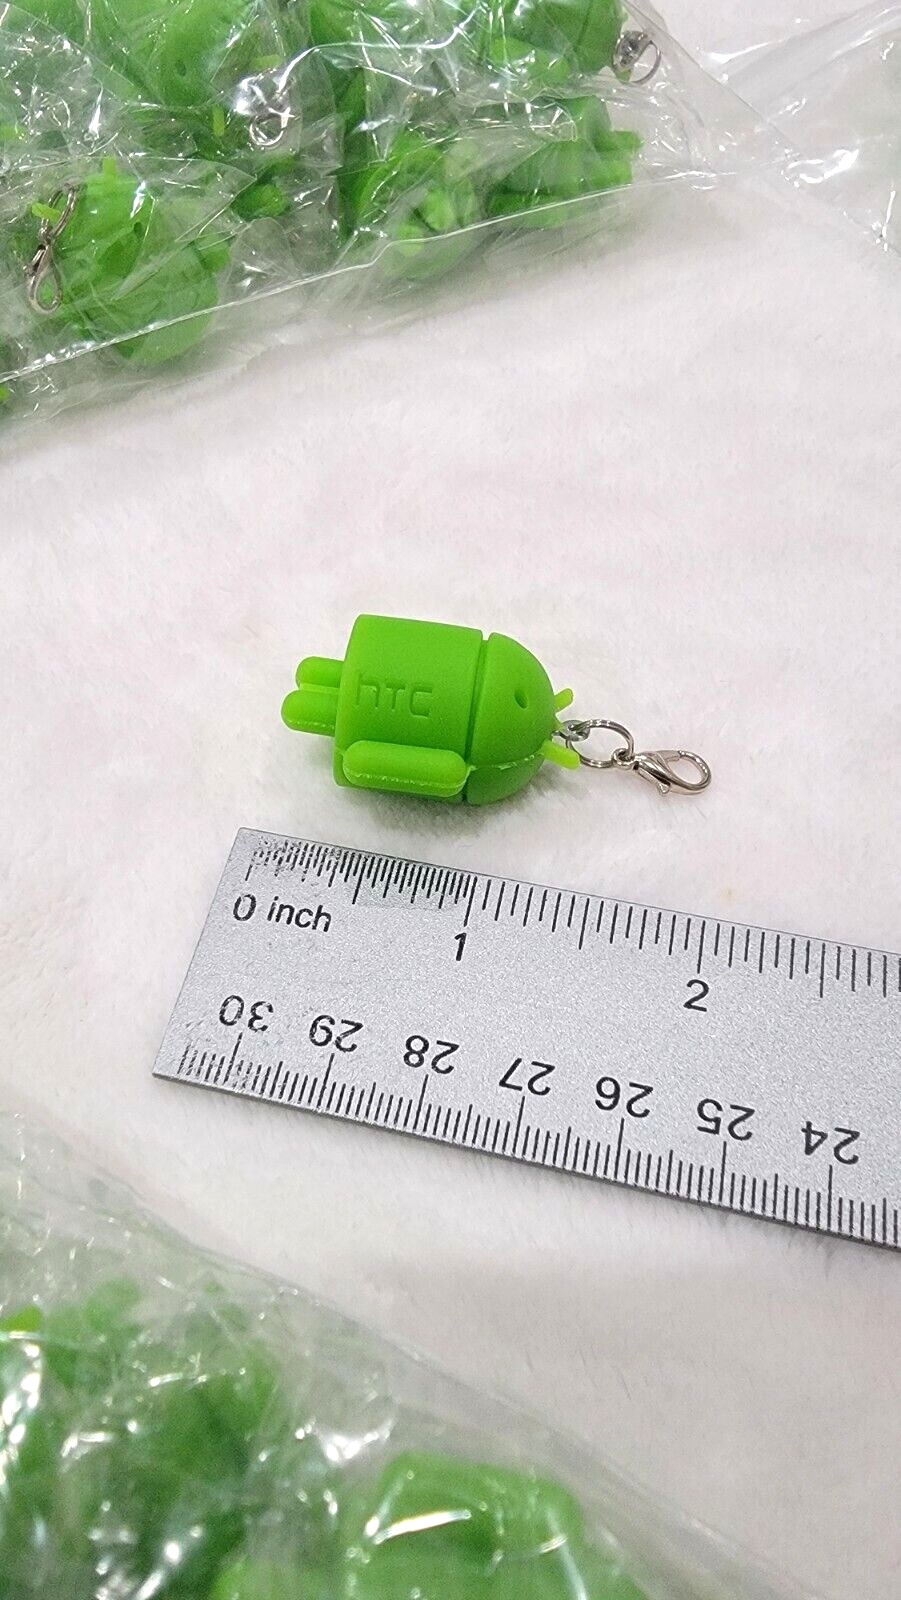 New Lot Of 25 Rubber Robot Google Android Key Chain Charm Mini Doll Green HTC